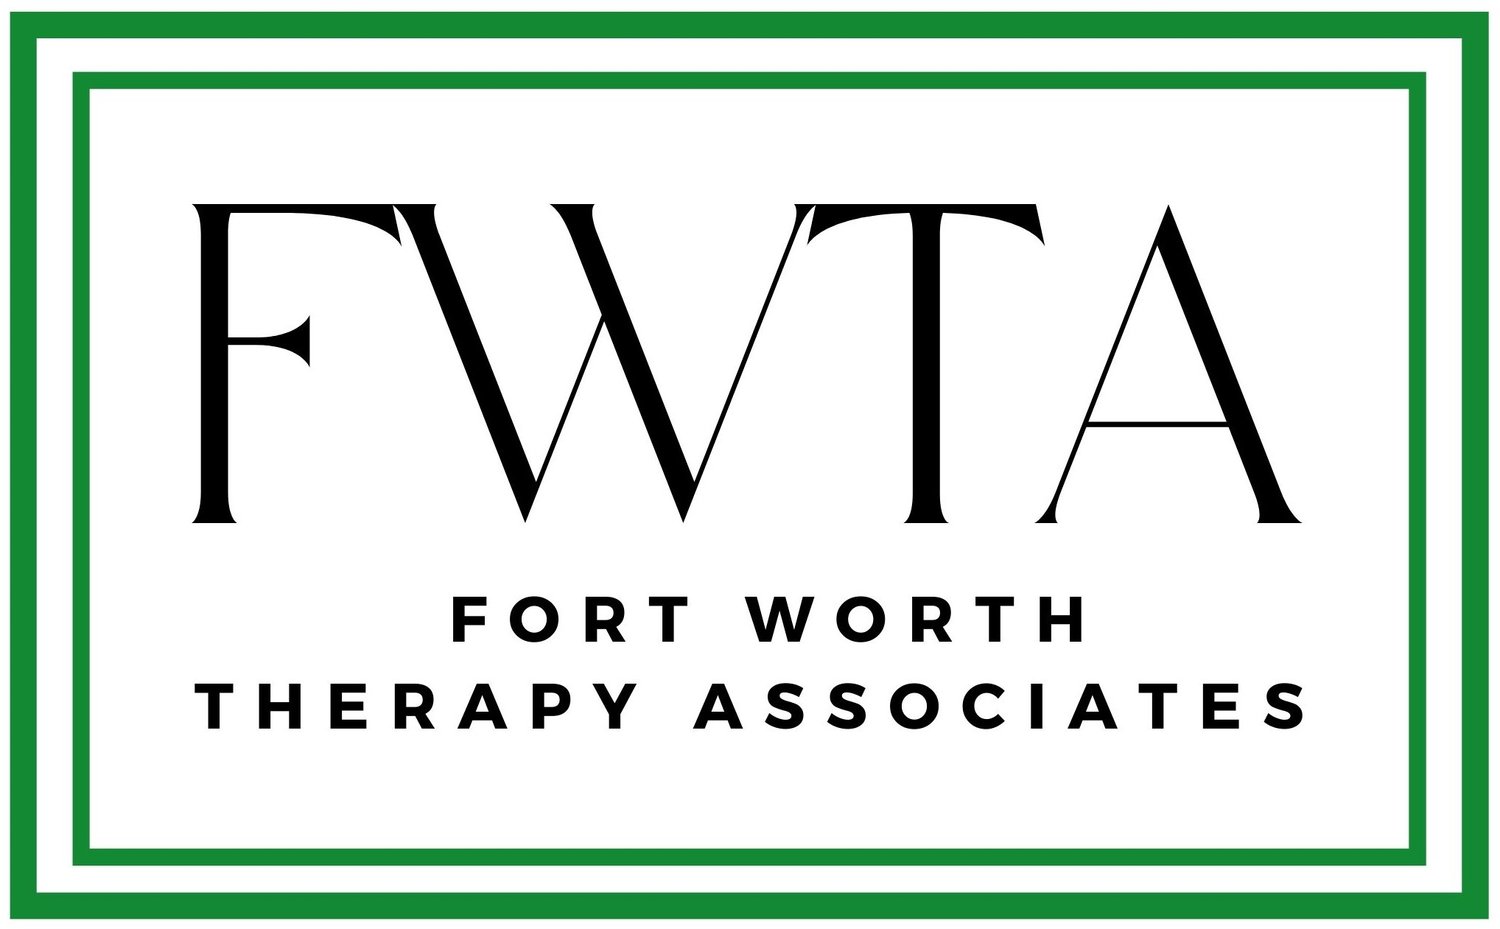 FORT WORTH THERAPY ASSOCIATES